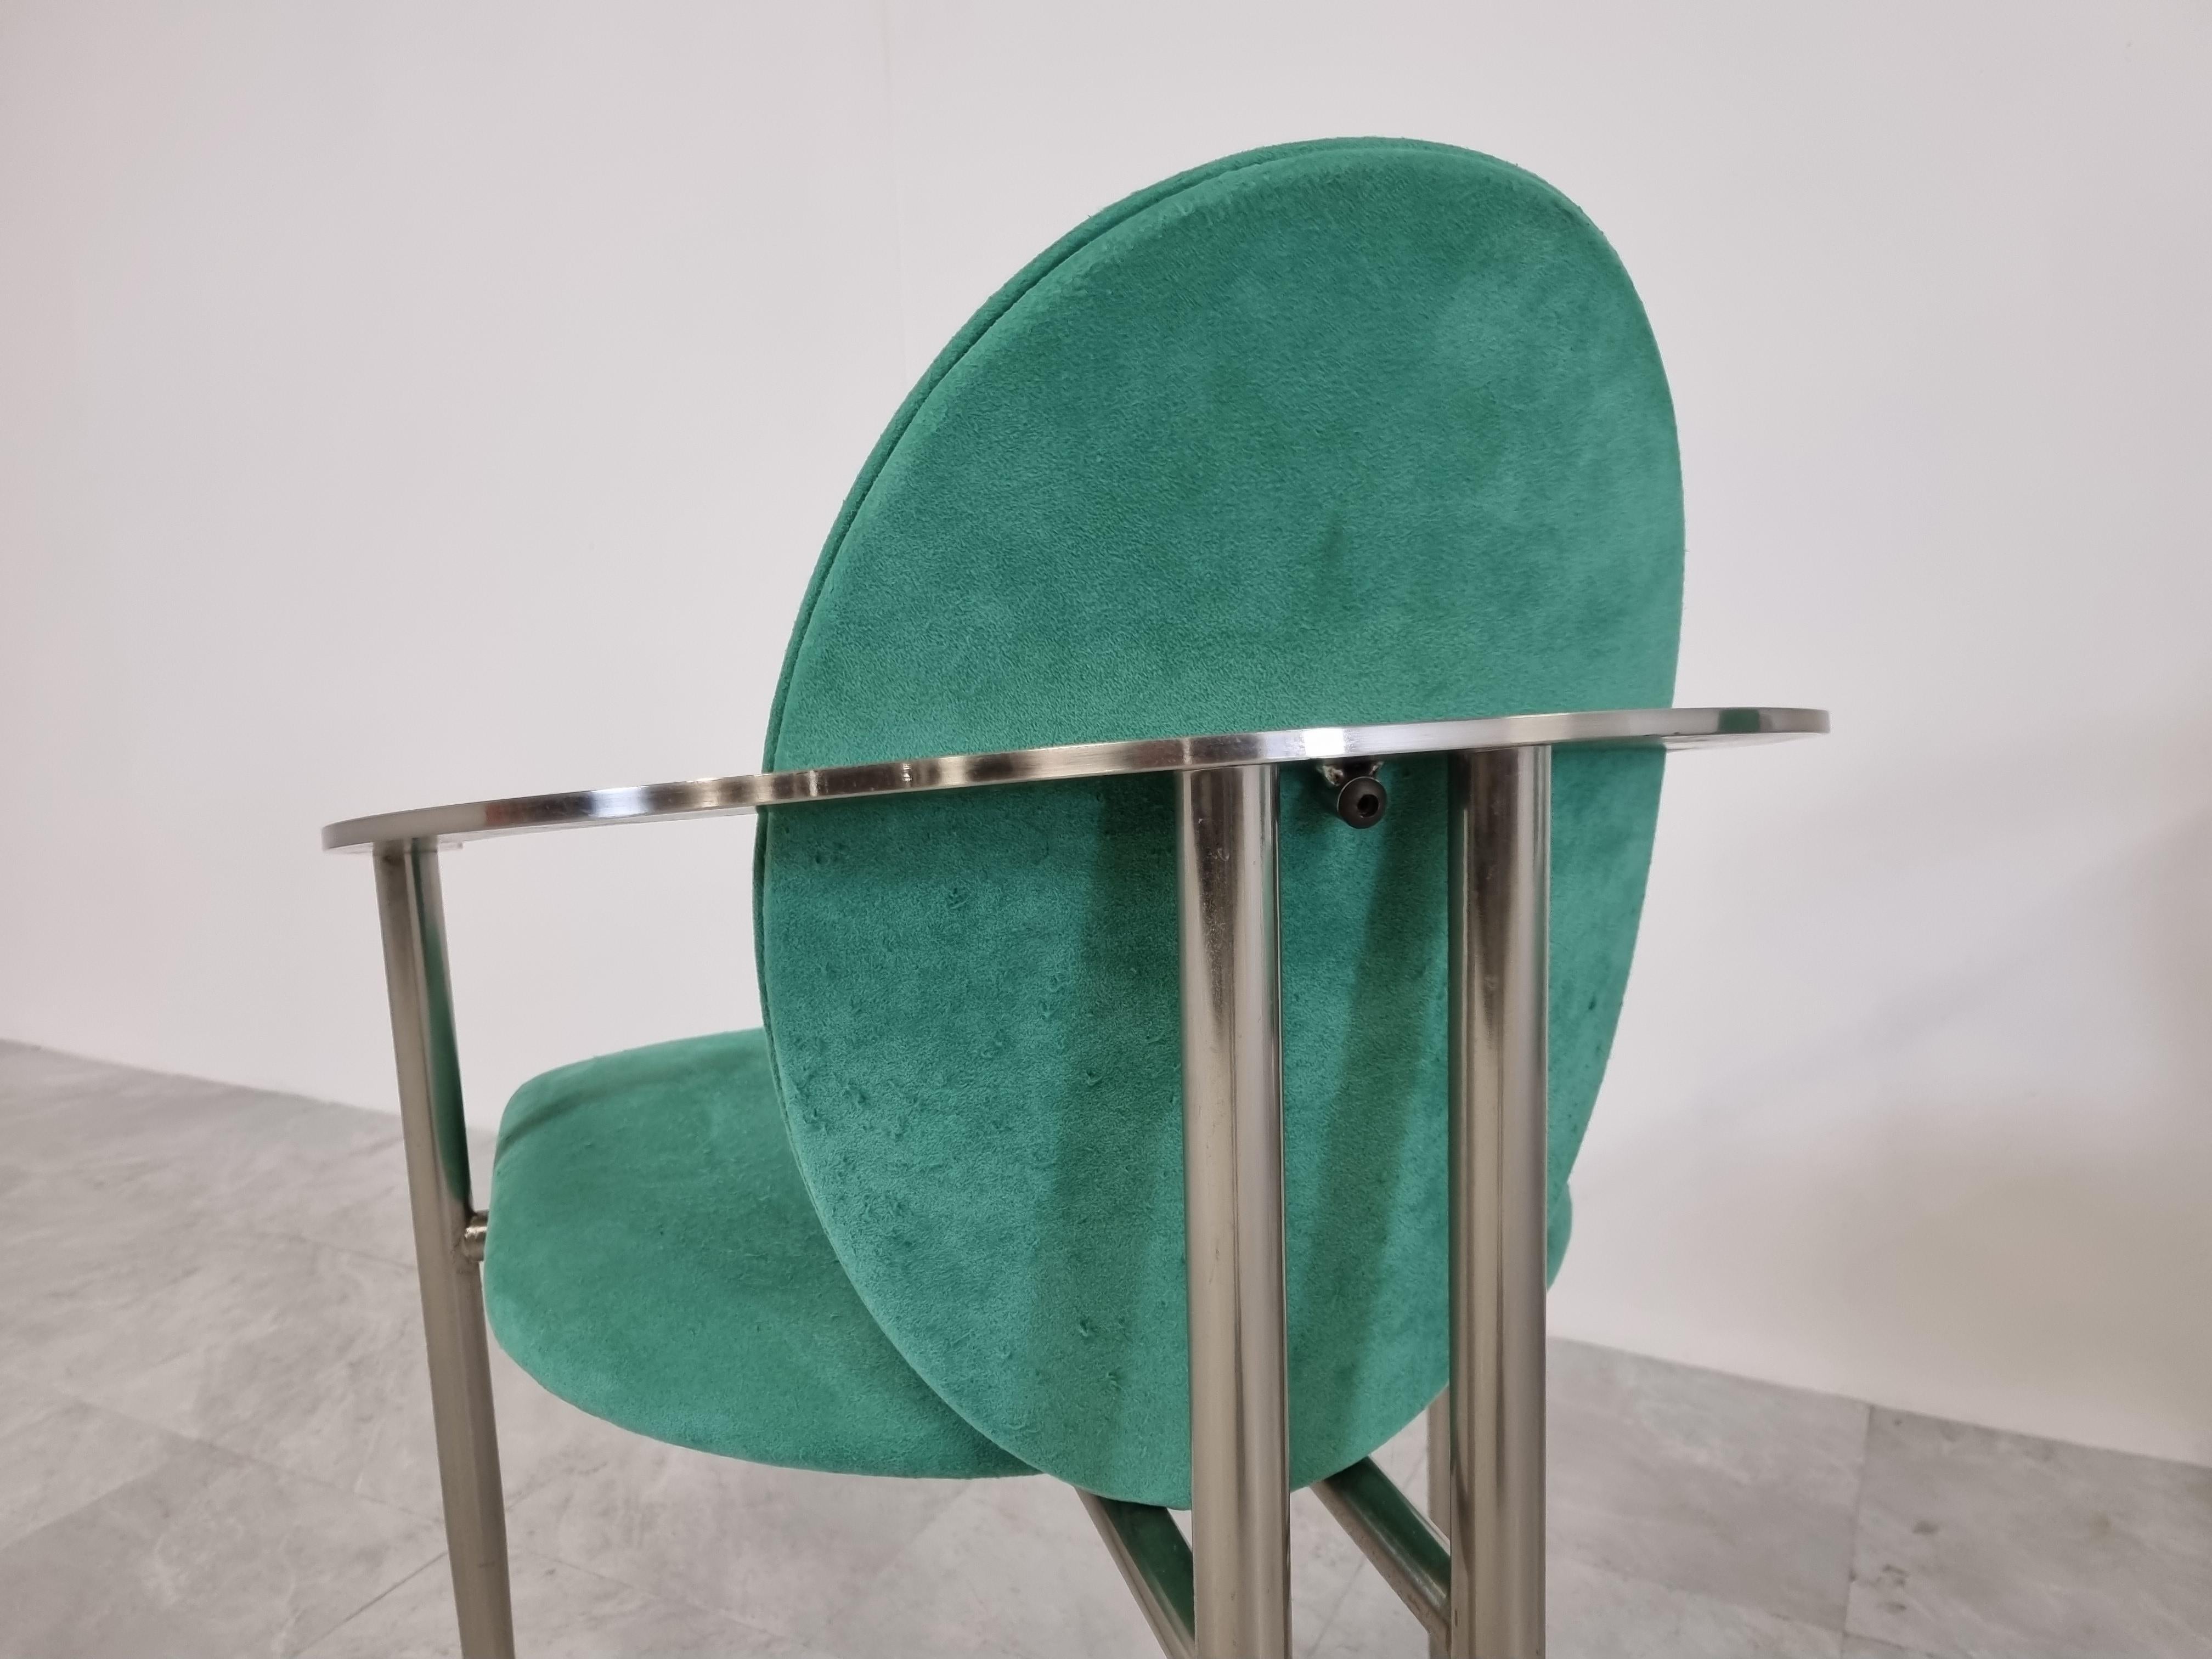 Set of four elegant dining room chairs manufactured by Belgochrom.

Nicely designed metal frames with elegant legs. Green suede upholstery.

Belgochrom used to produce high end furniture and was the higher price-range furniture in Belgium